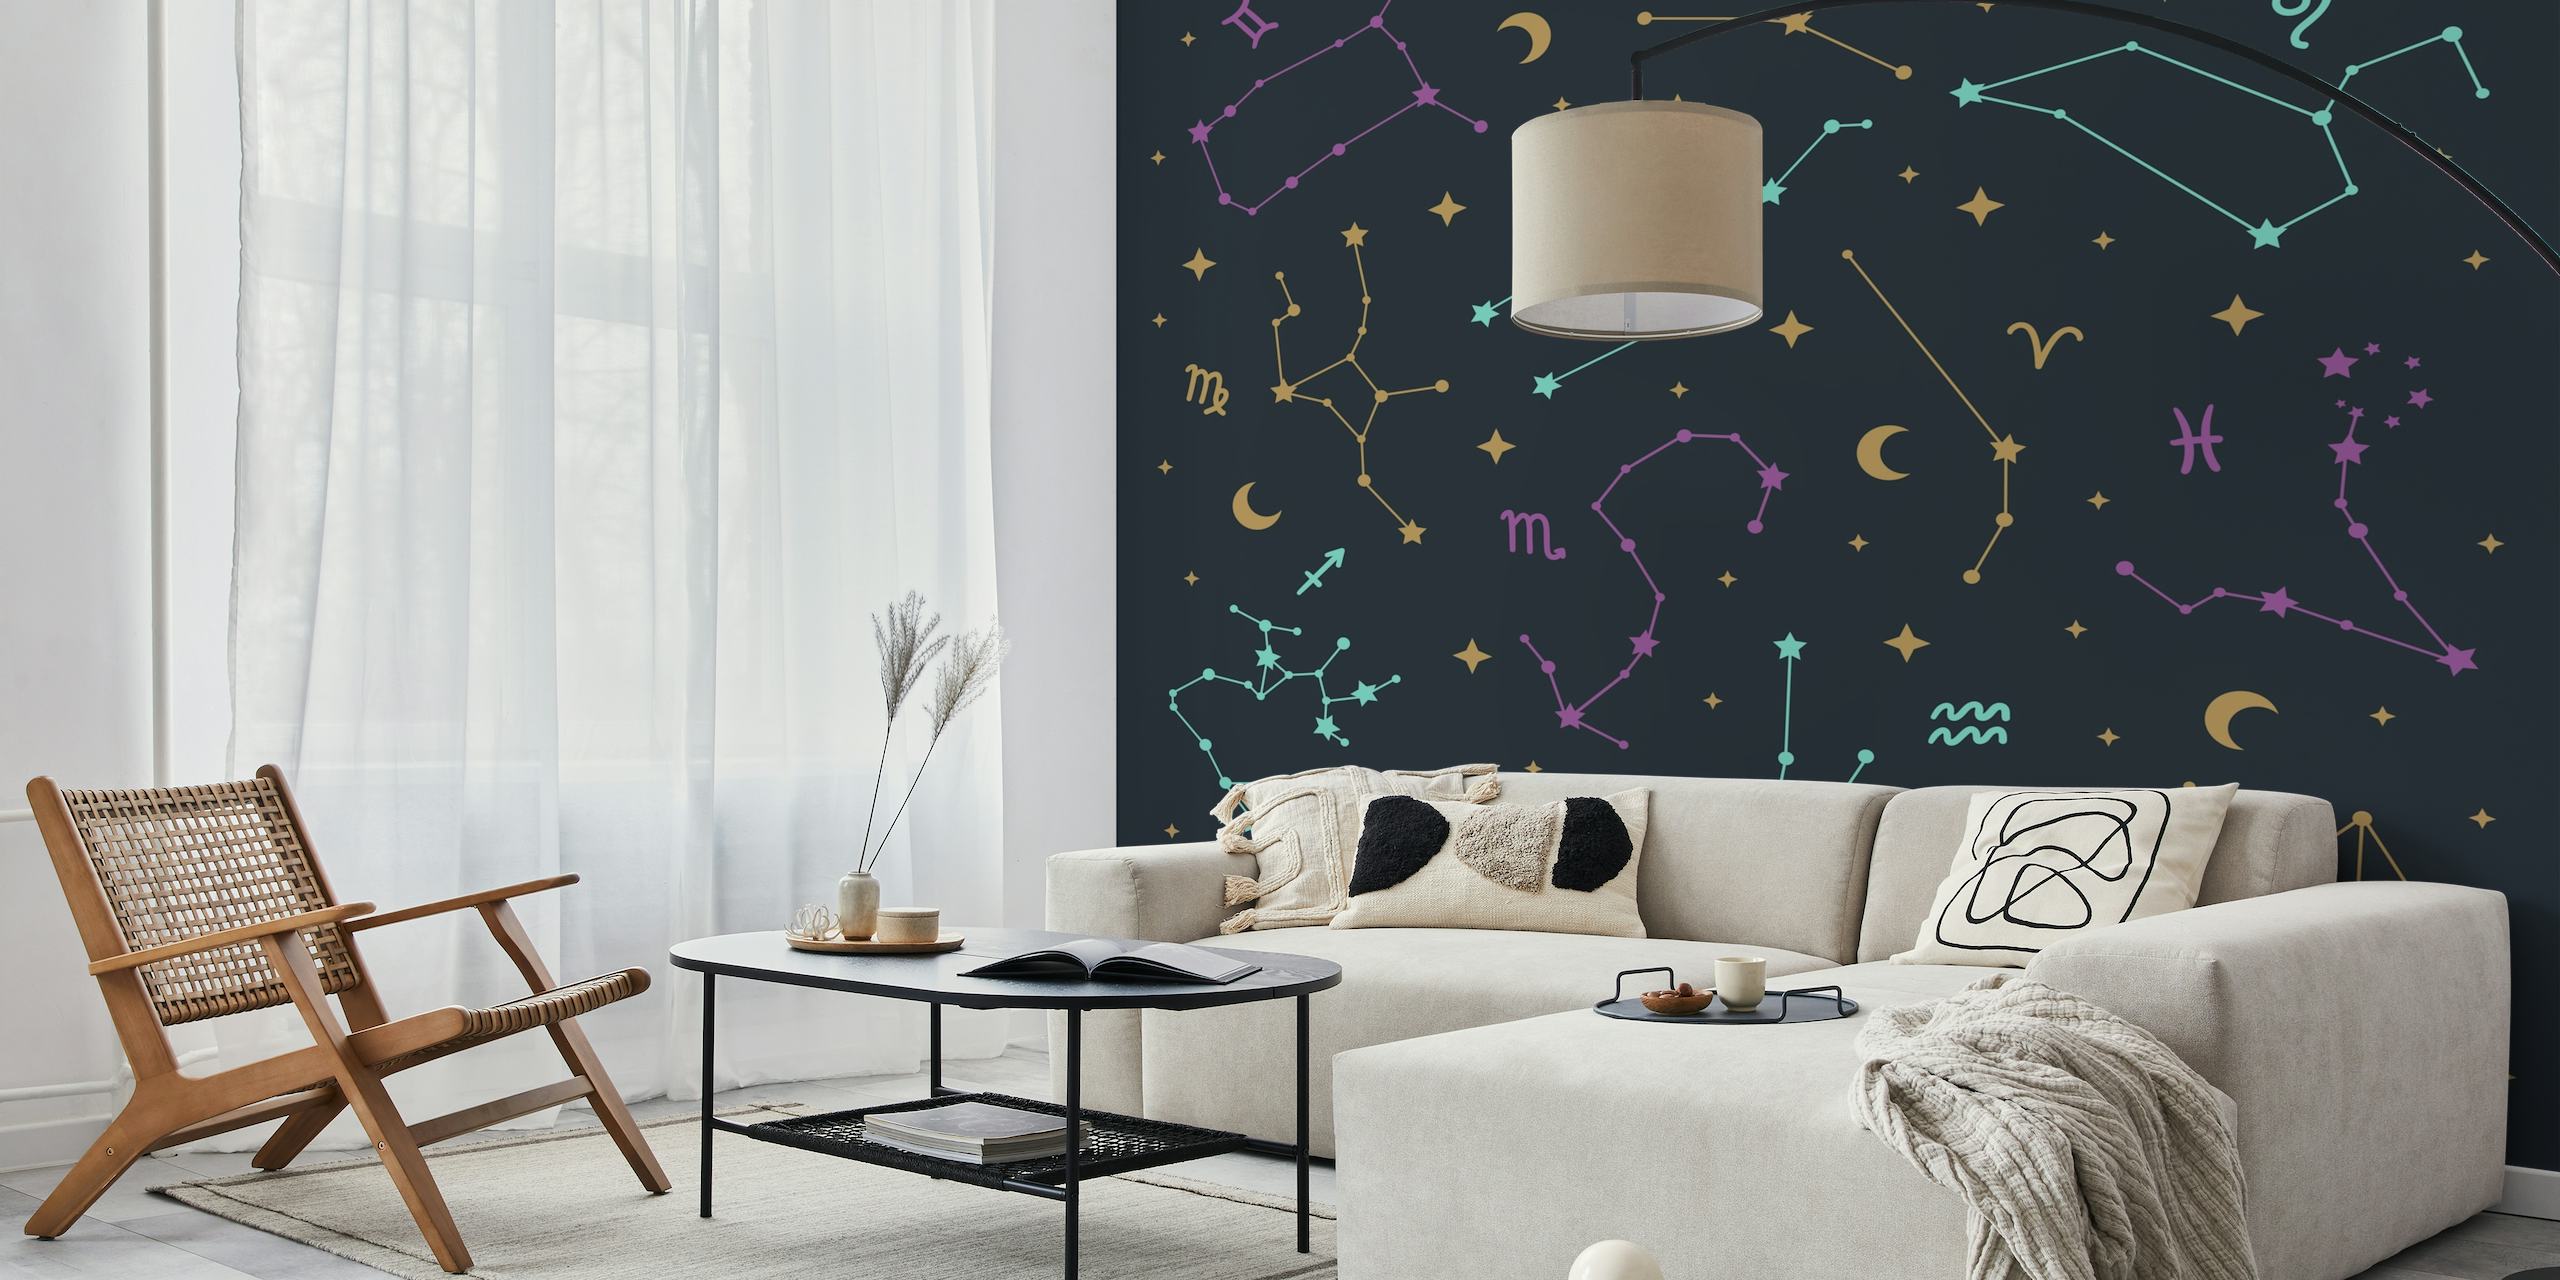 Zodiacal Constellations wall mural with stars and zodiac signs